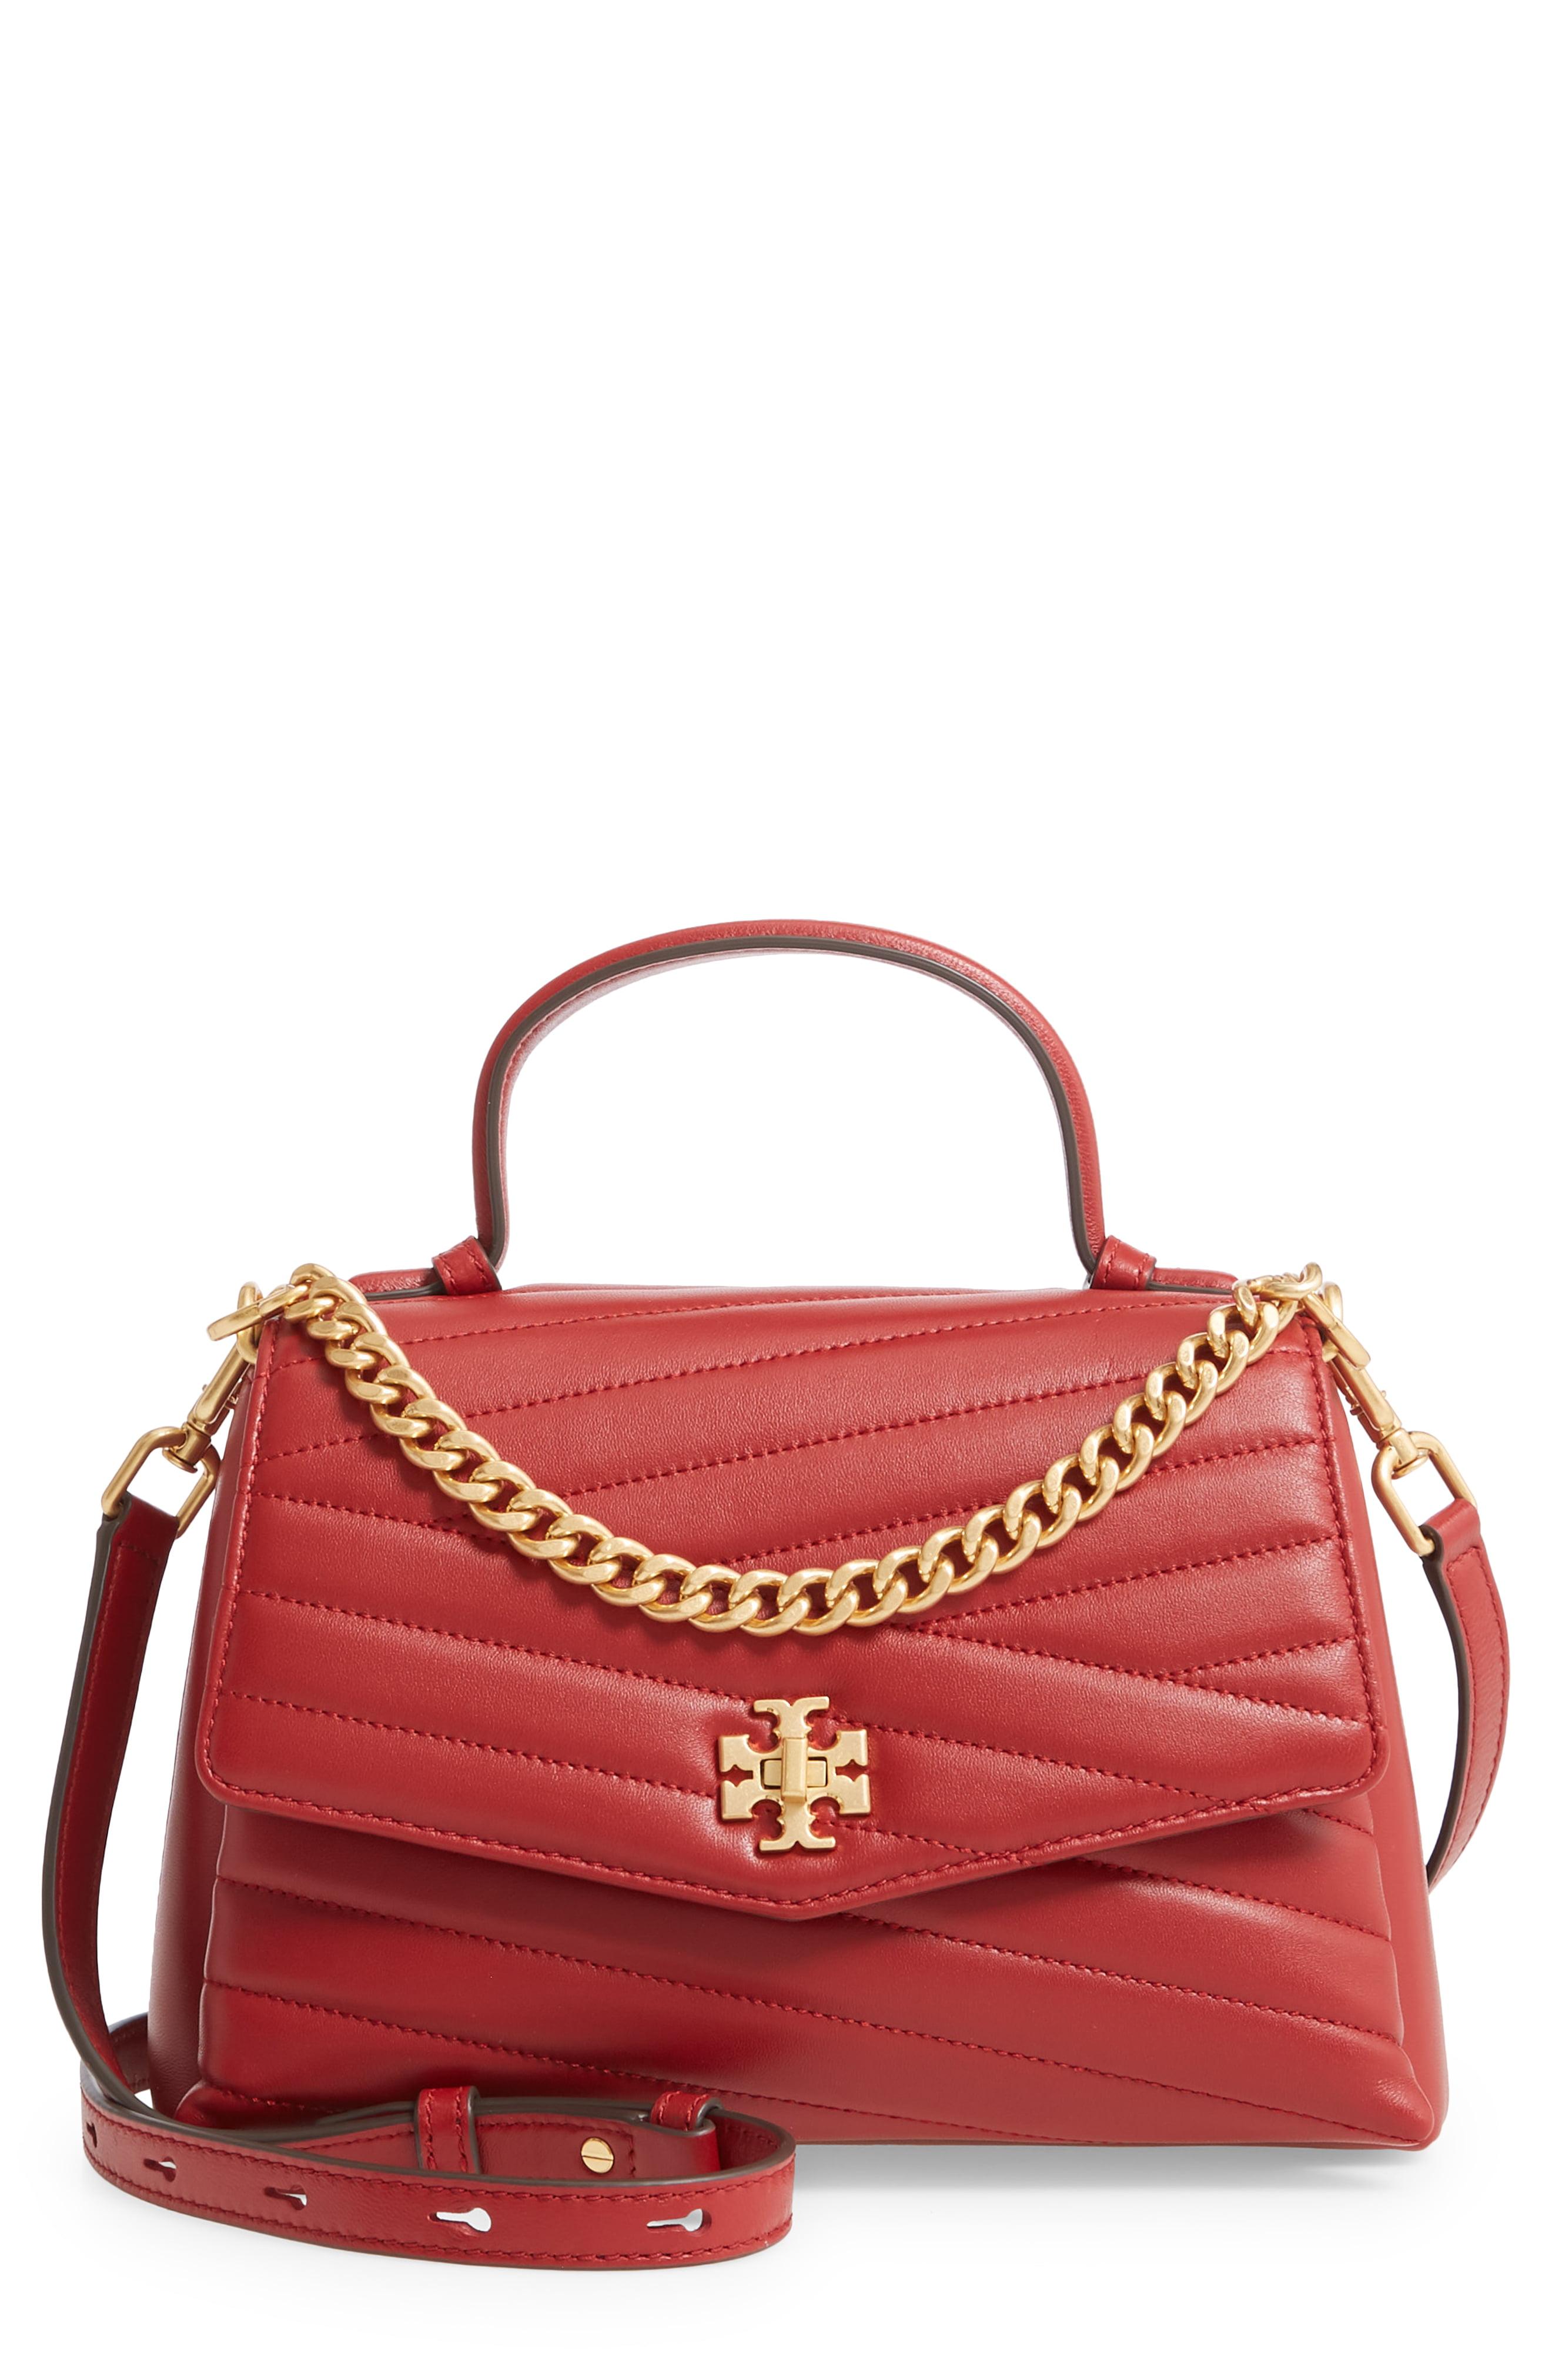 Tory Burch Kira Small Chevron Leather Top Handle Bag in Red | Lyst